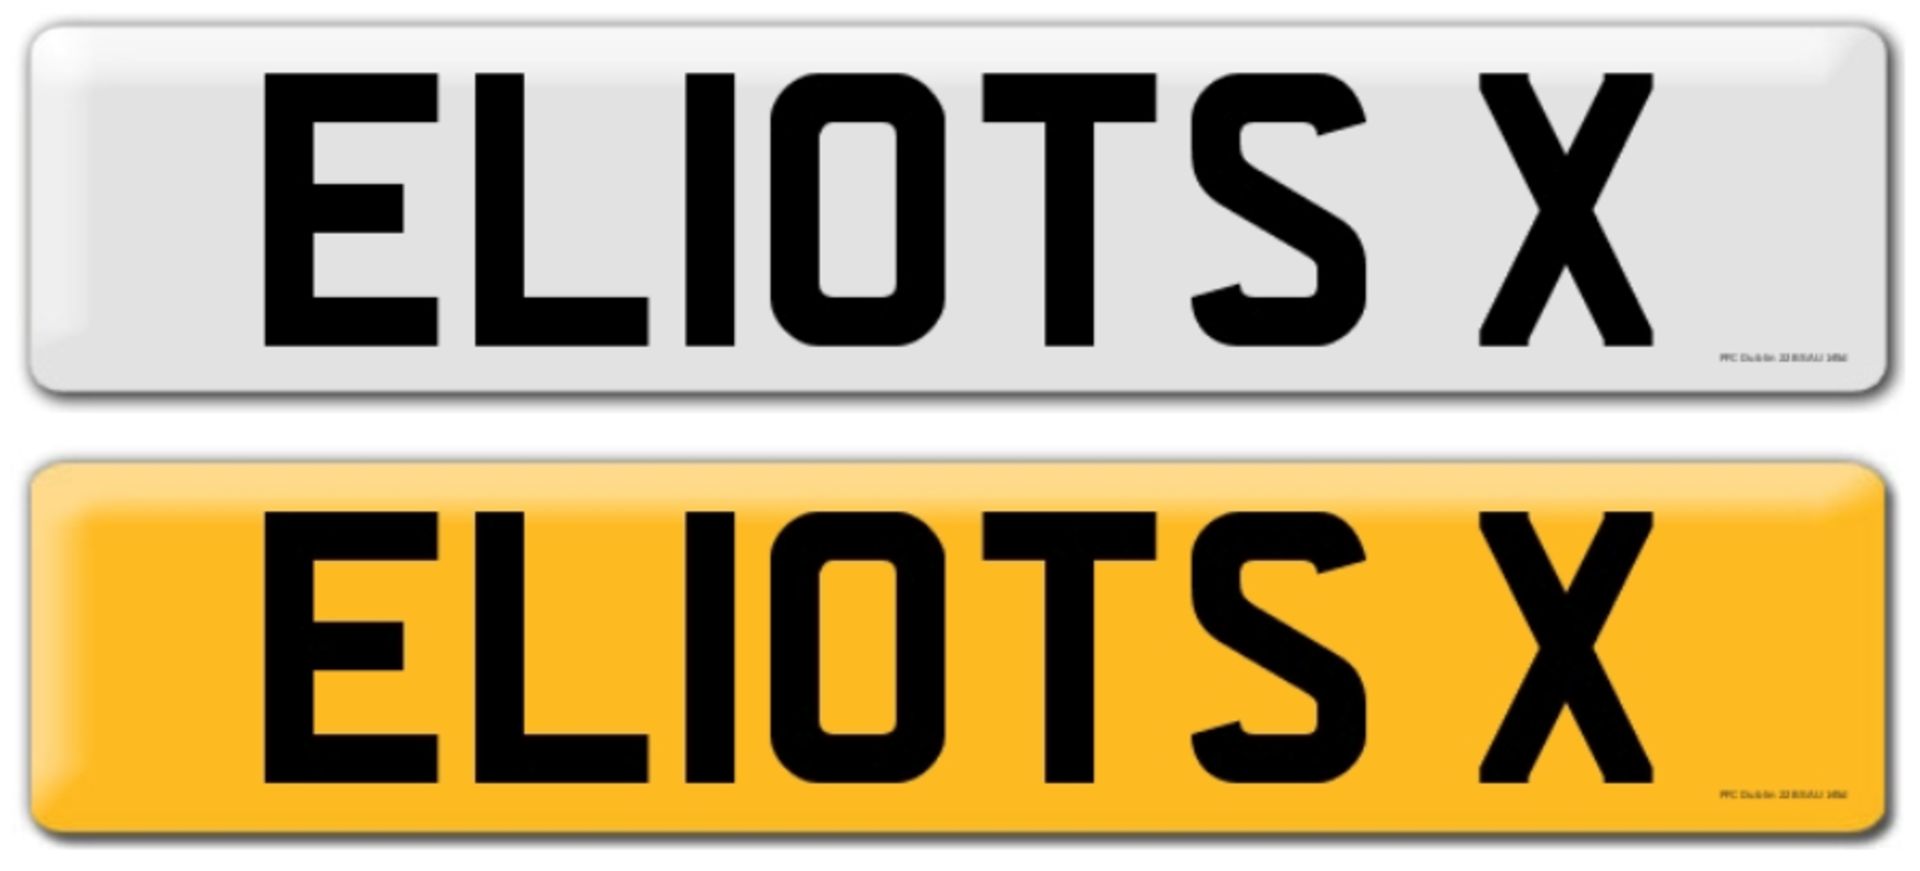 Registration on DVLA retention certificate, ready to transfer EL10TS X, This number plate /